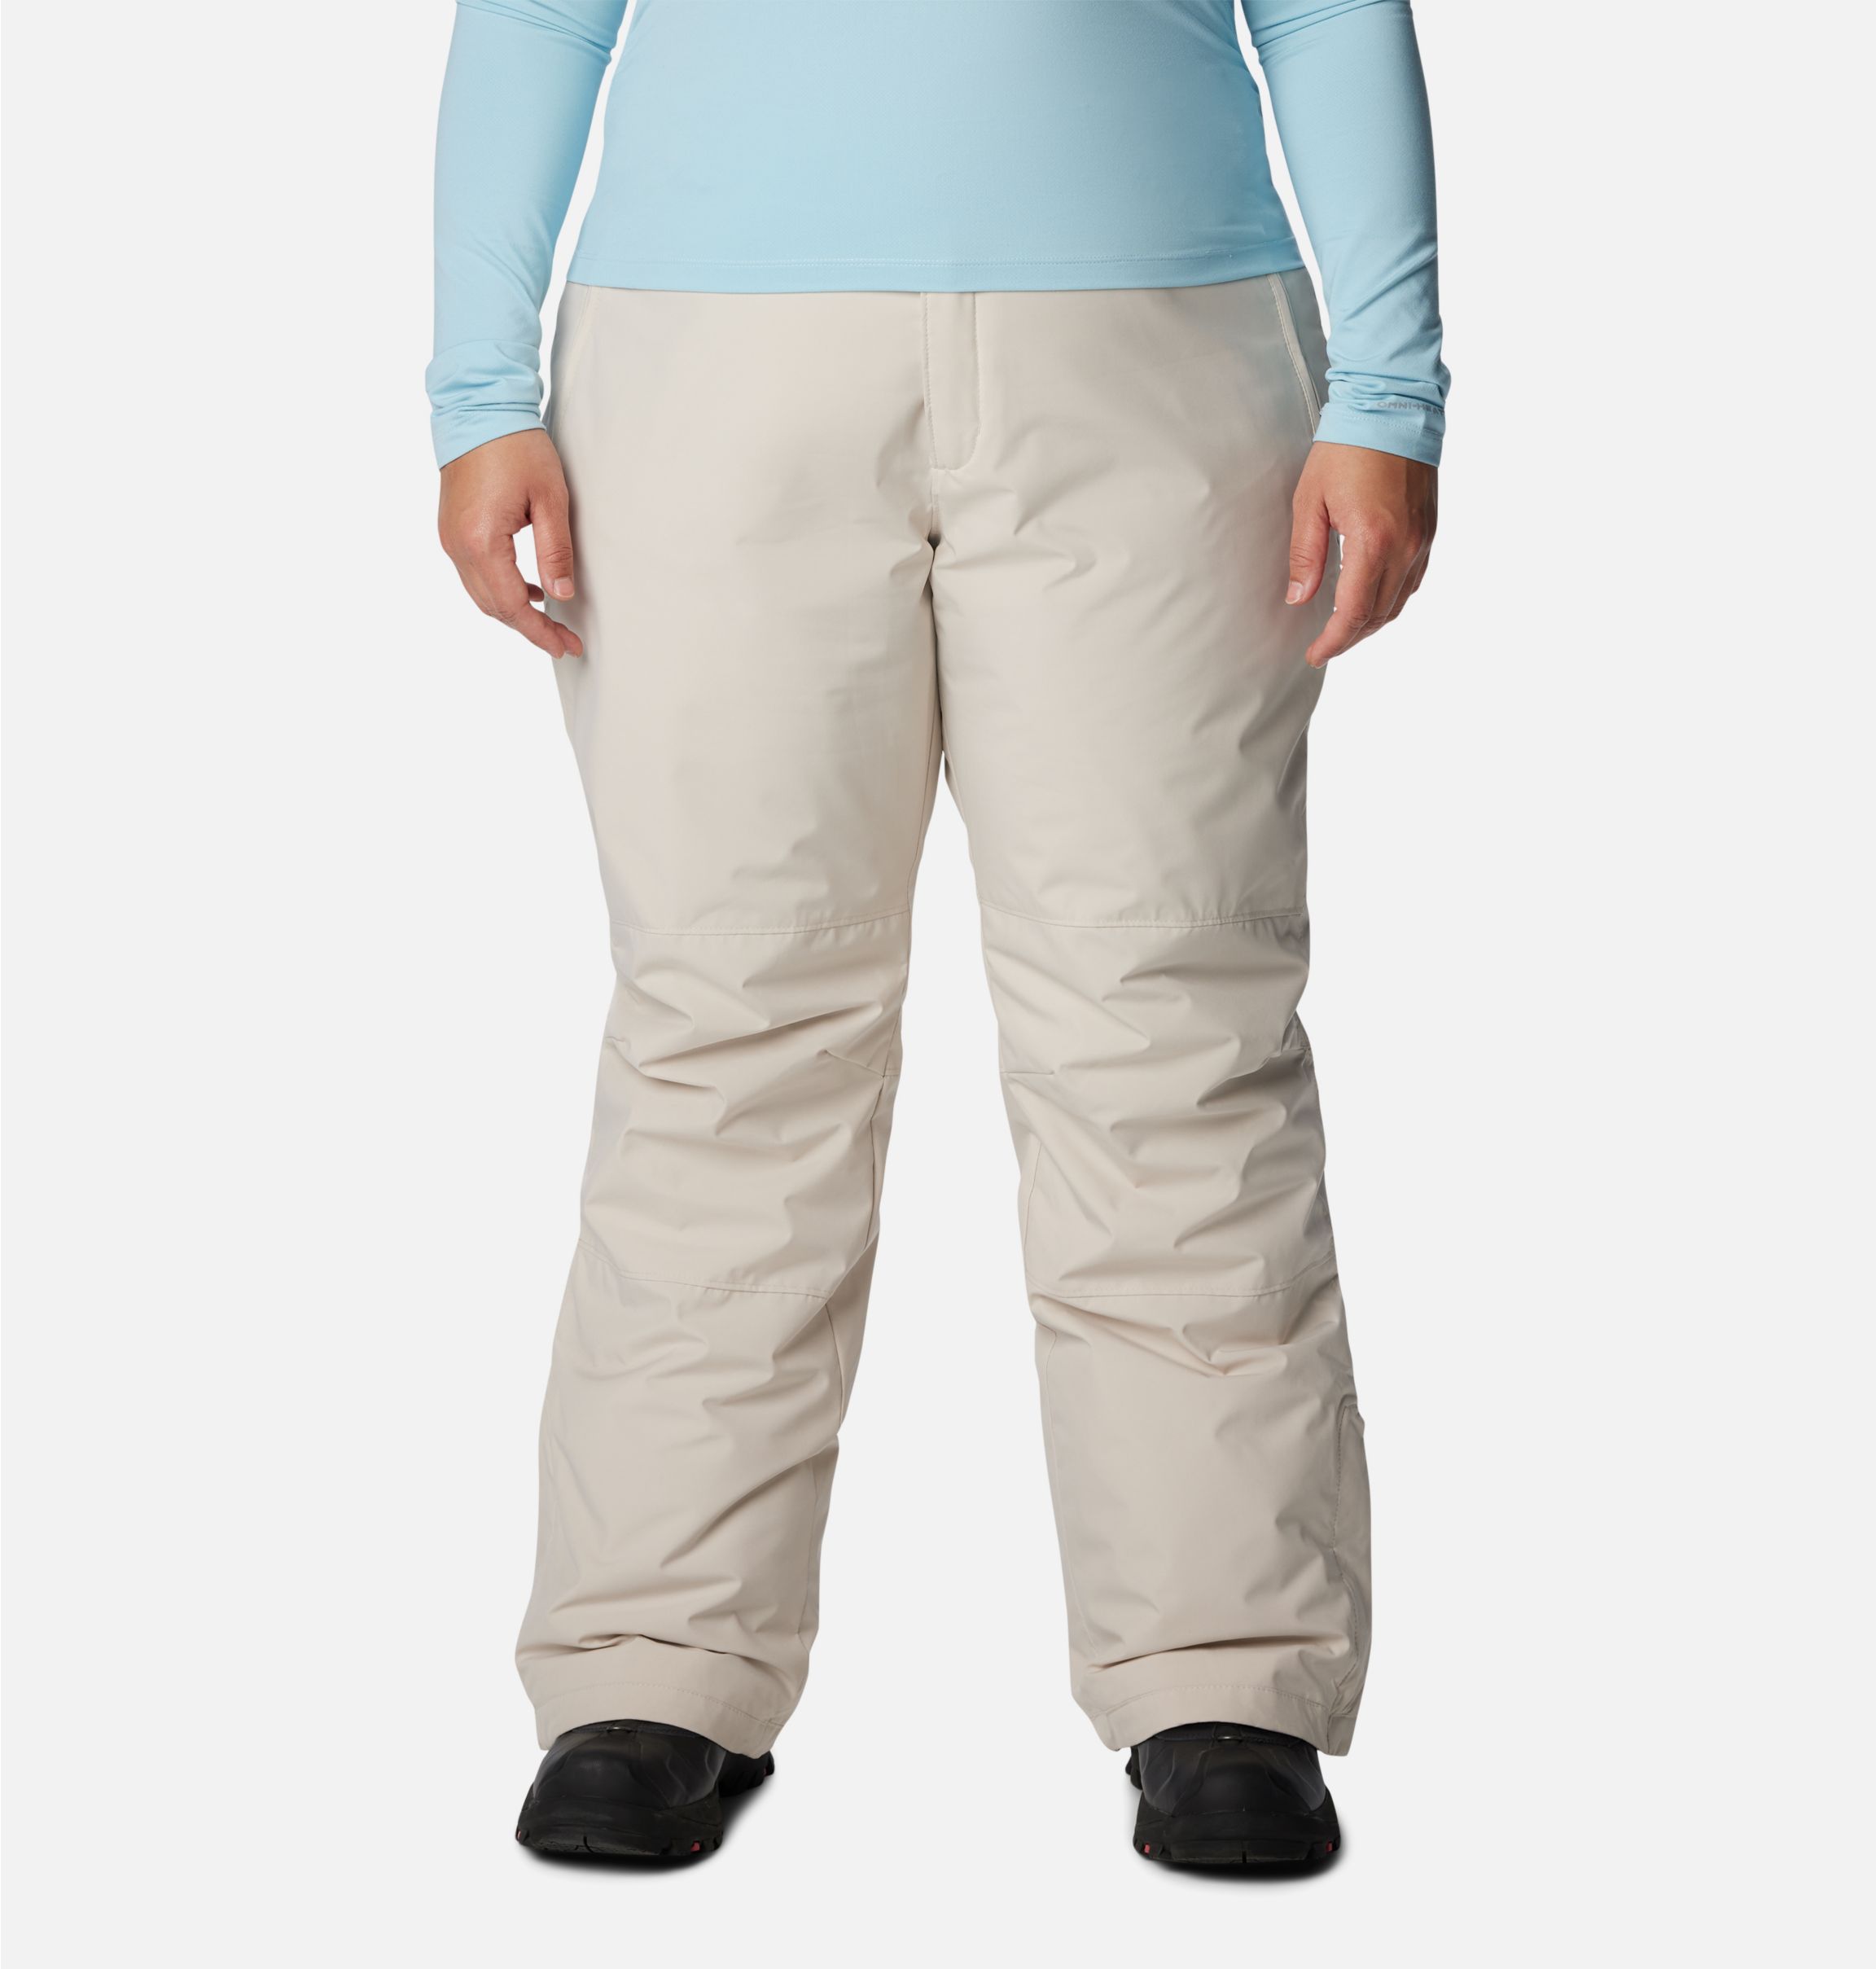 Columbia Women's Shafer Canyon Insulated Pant, Aqua Haze, Small at   Women's Clothing store